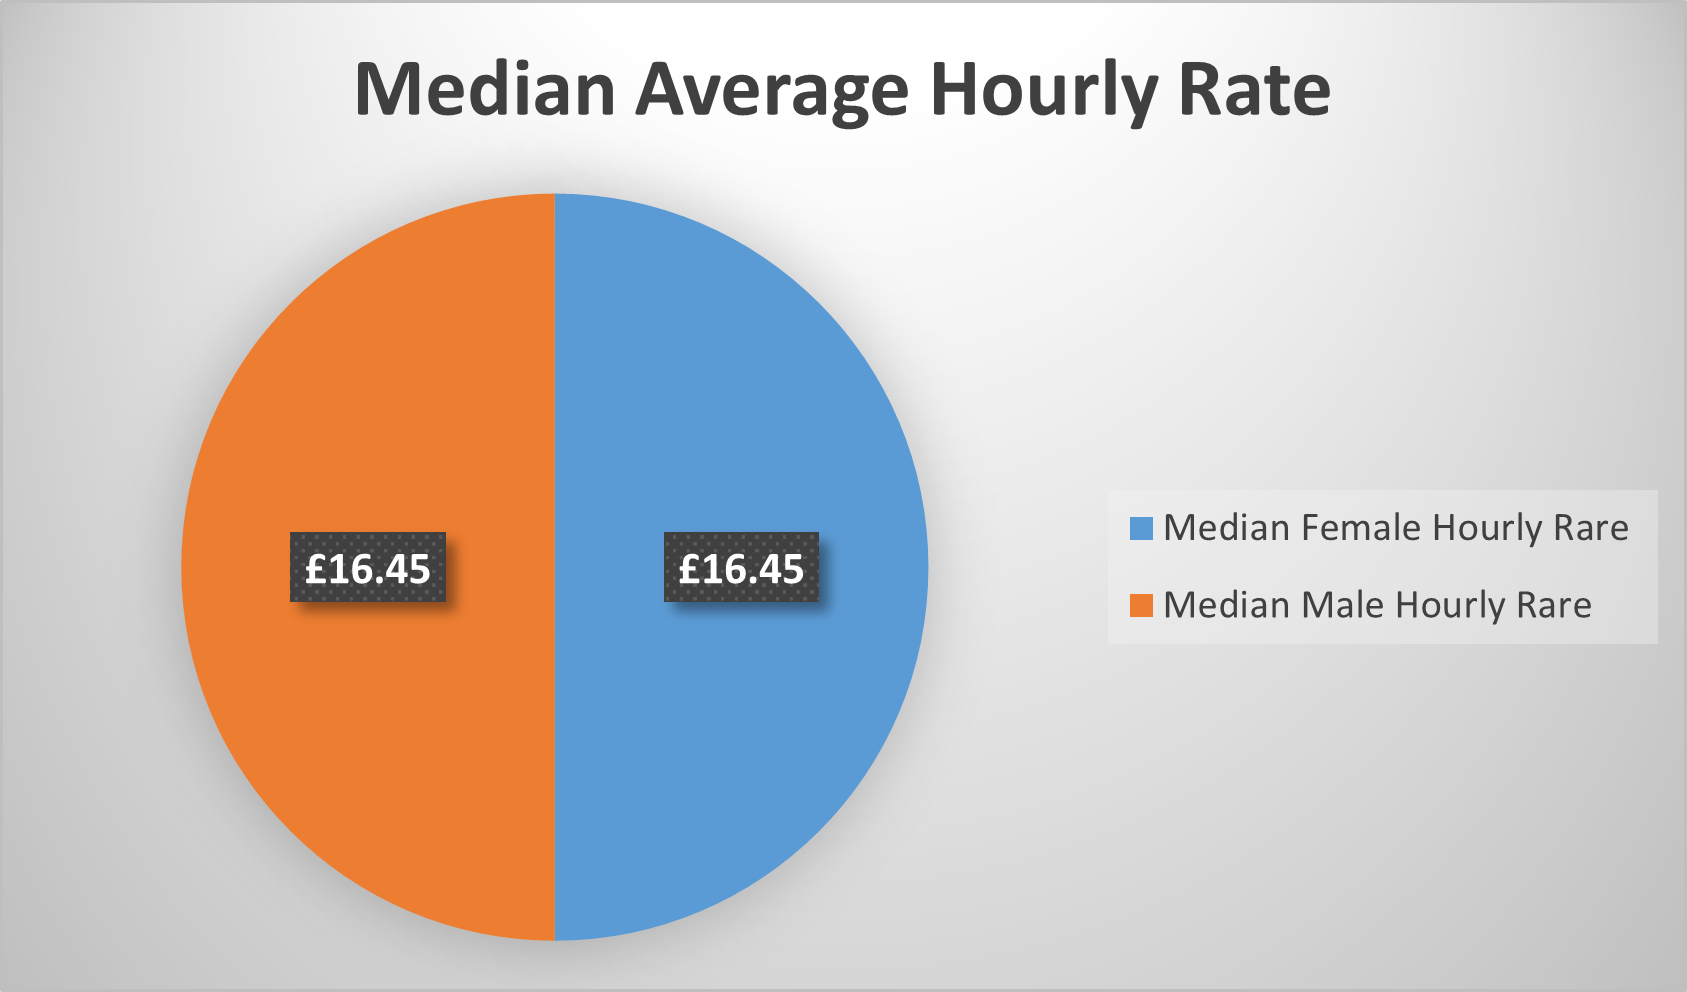 Male median hourly rate £16.45, Female Median hourly rate £16.45